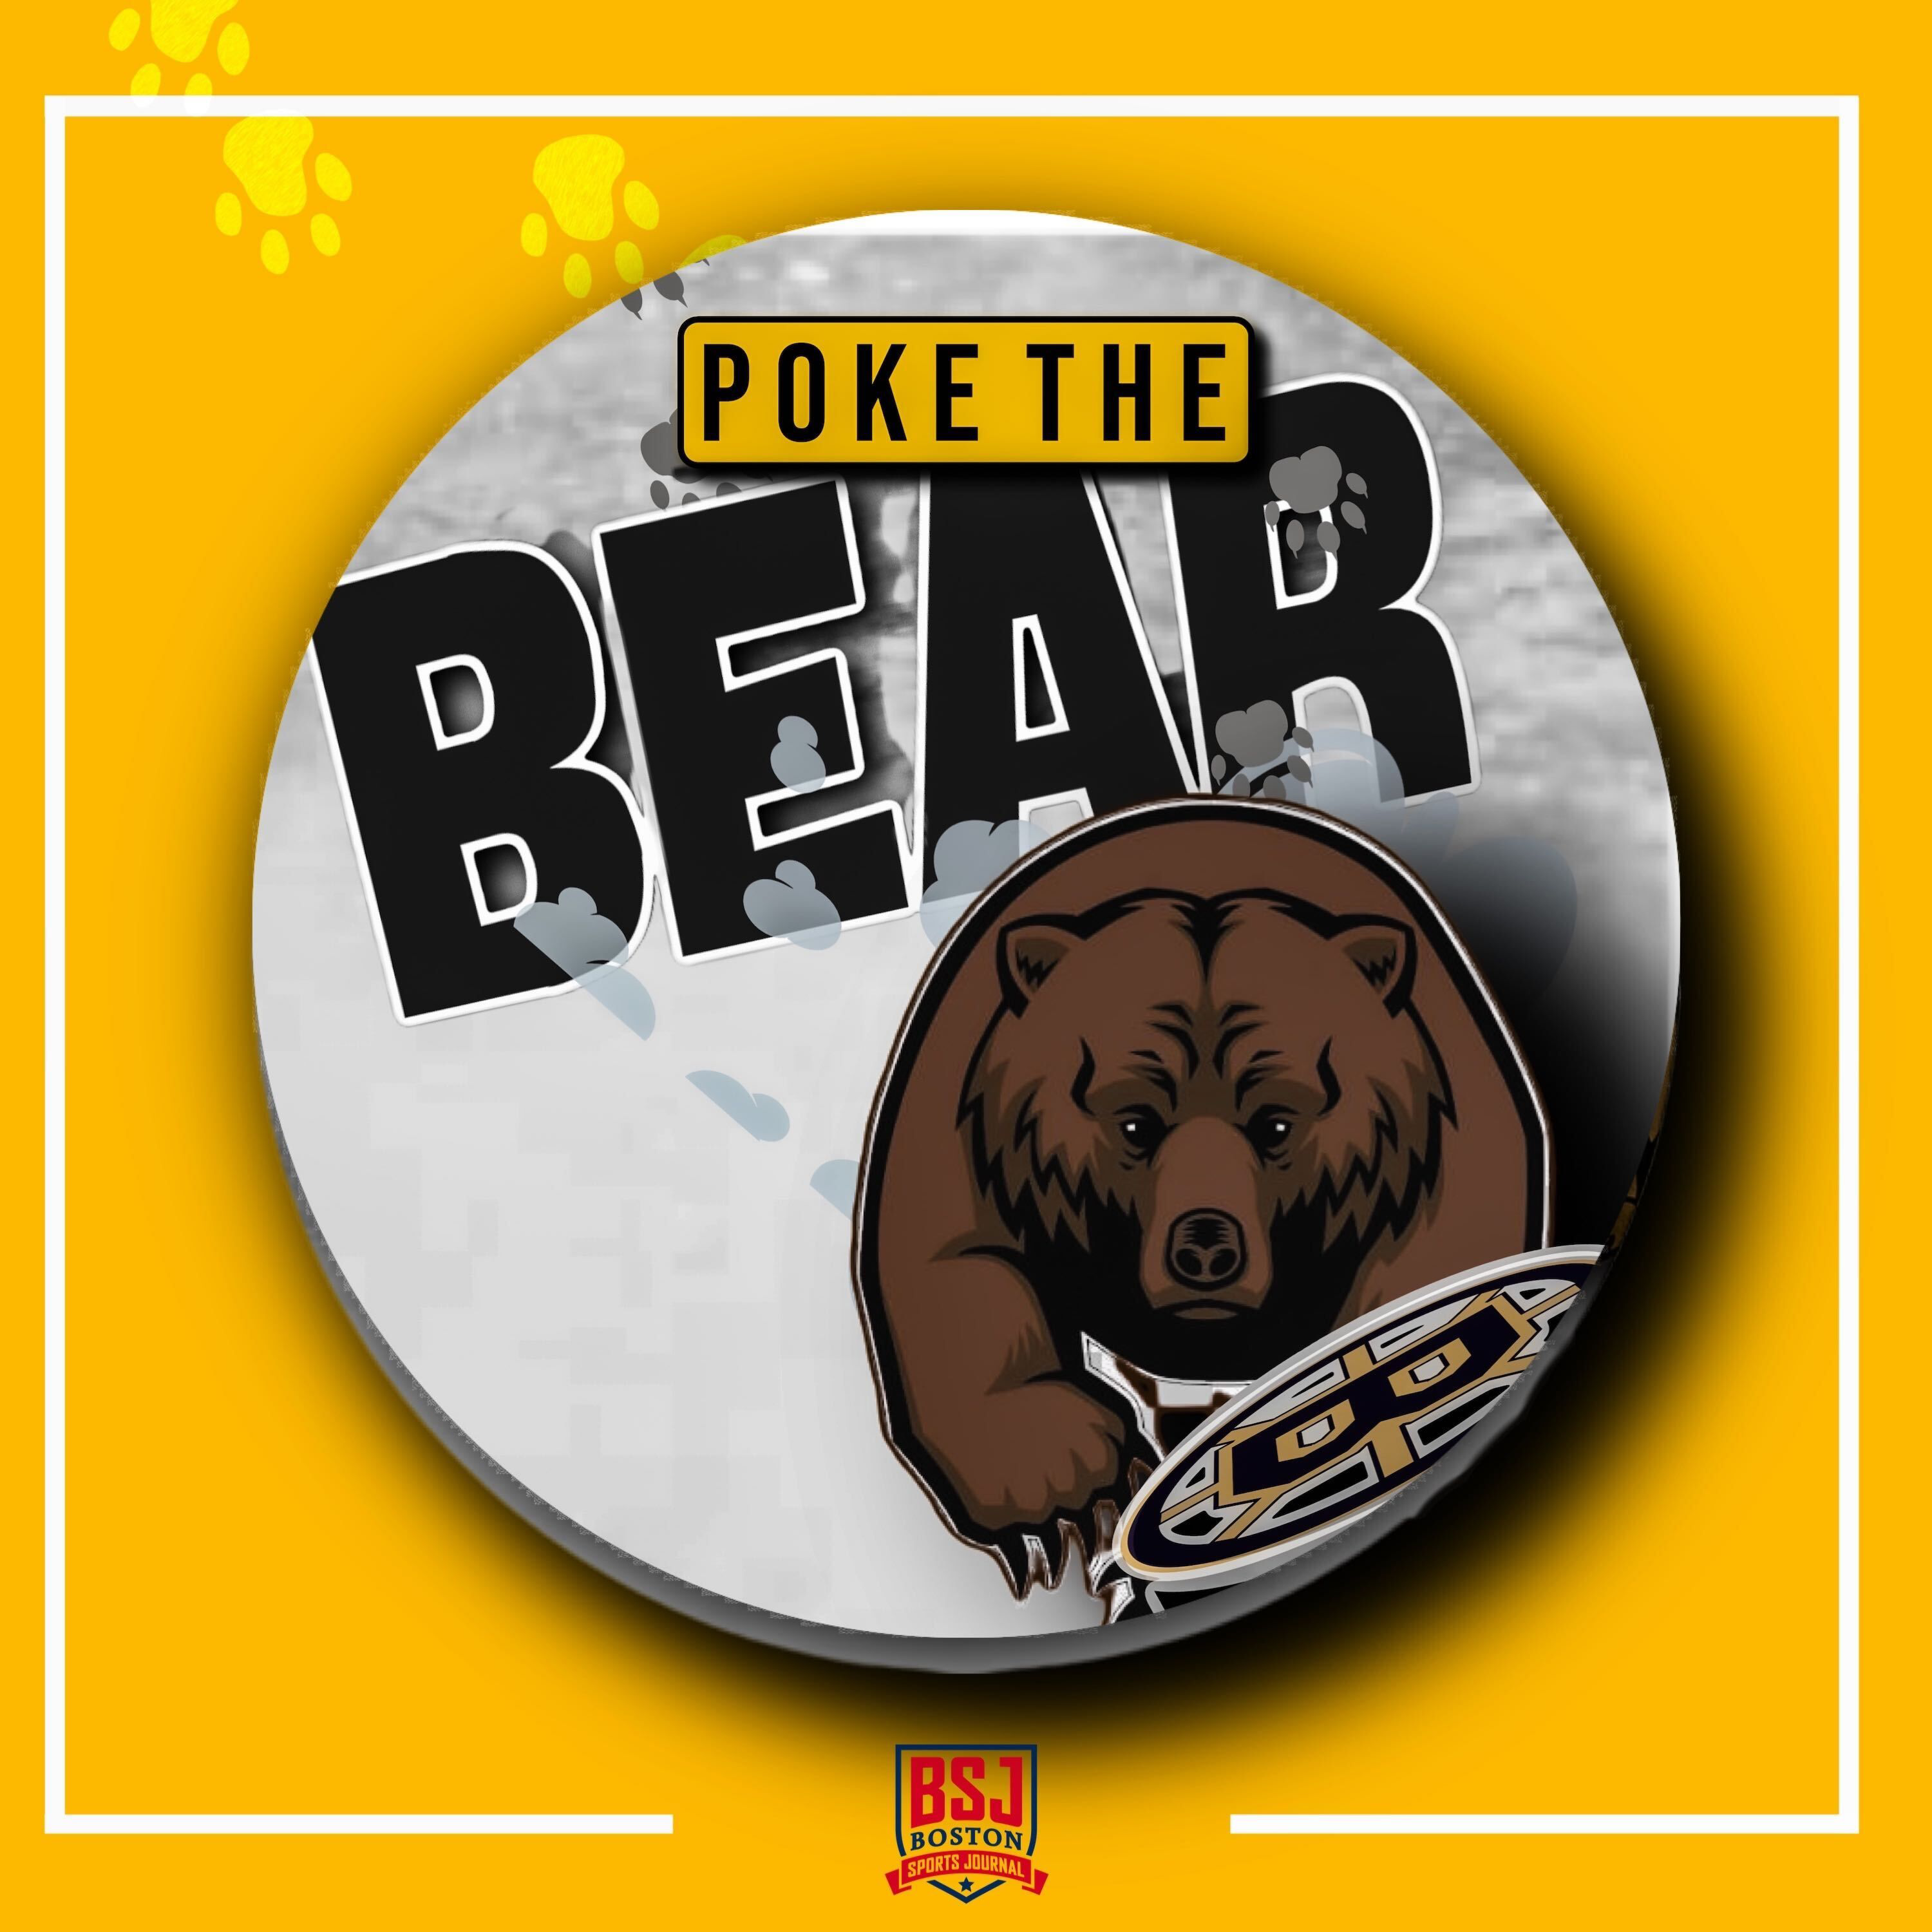 A highlight from Kicking Tires on Conor Garland & Players Who Need to Rebound in the Second Half | Poke the Bear w/ Conor Ryan